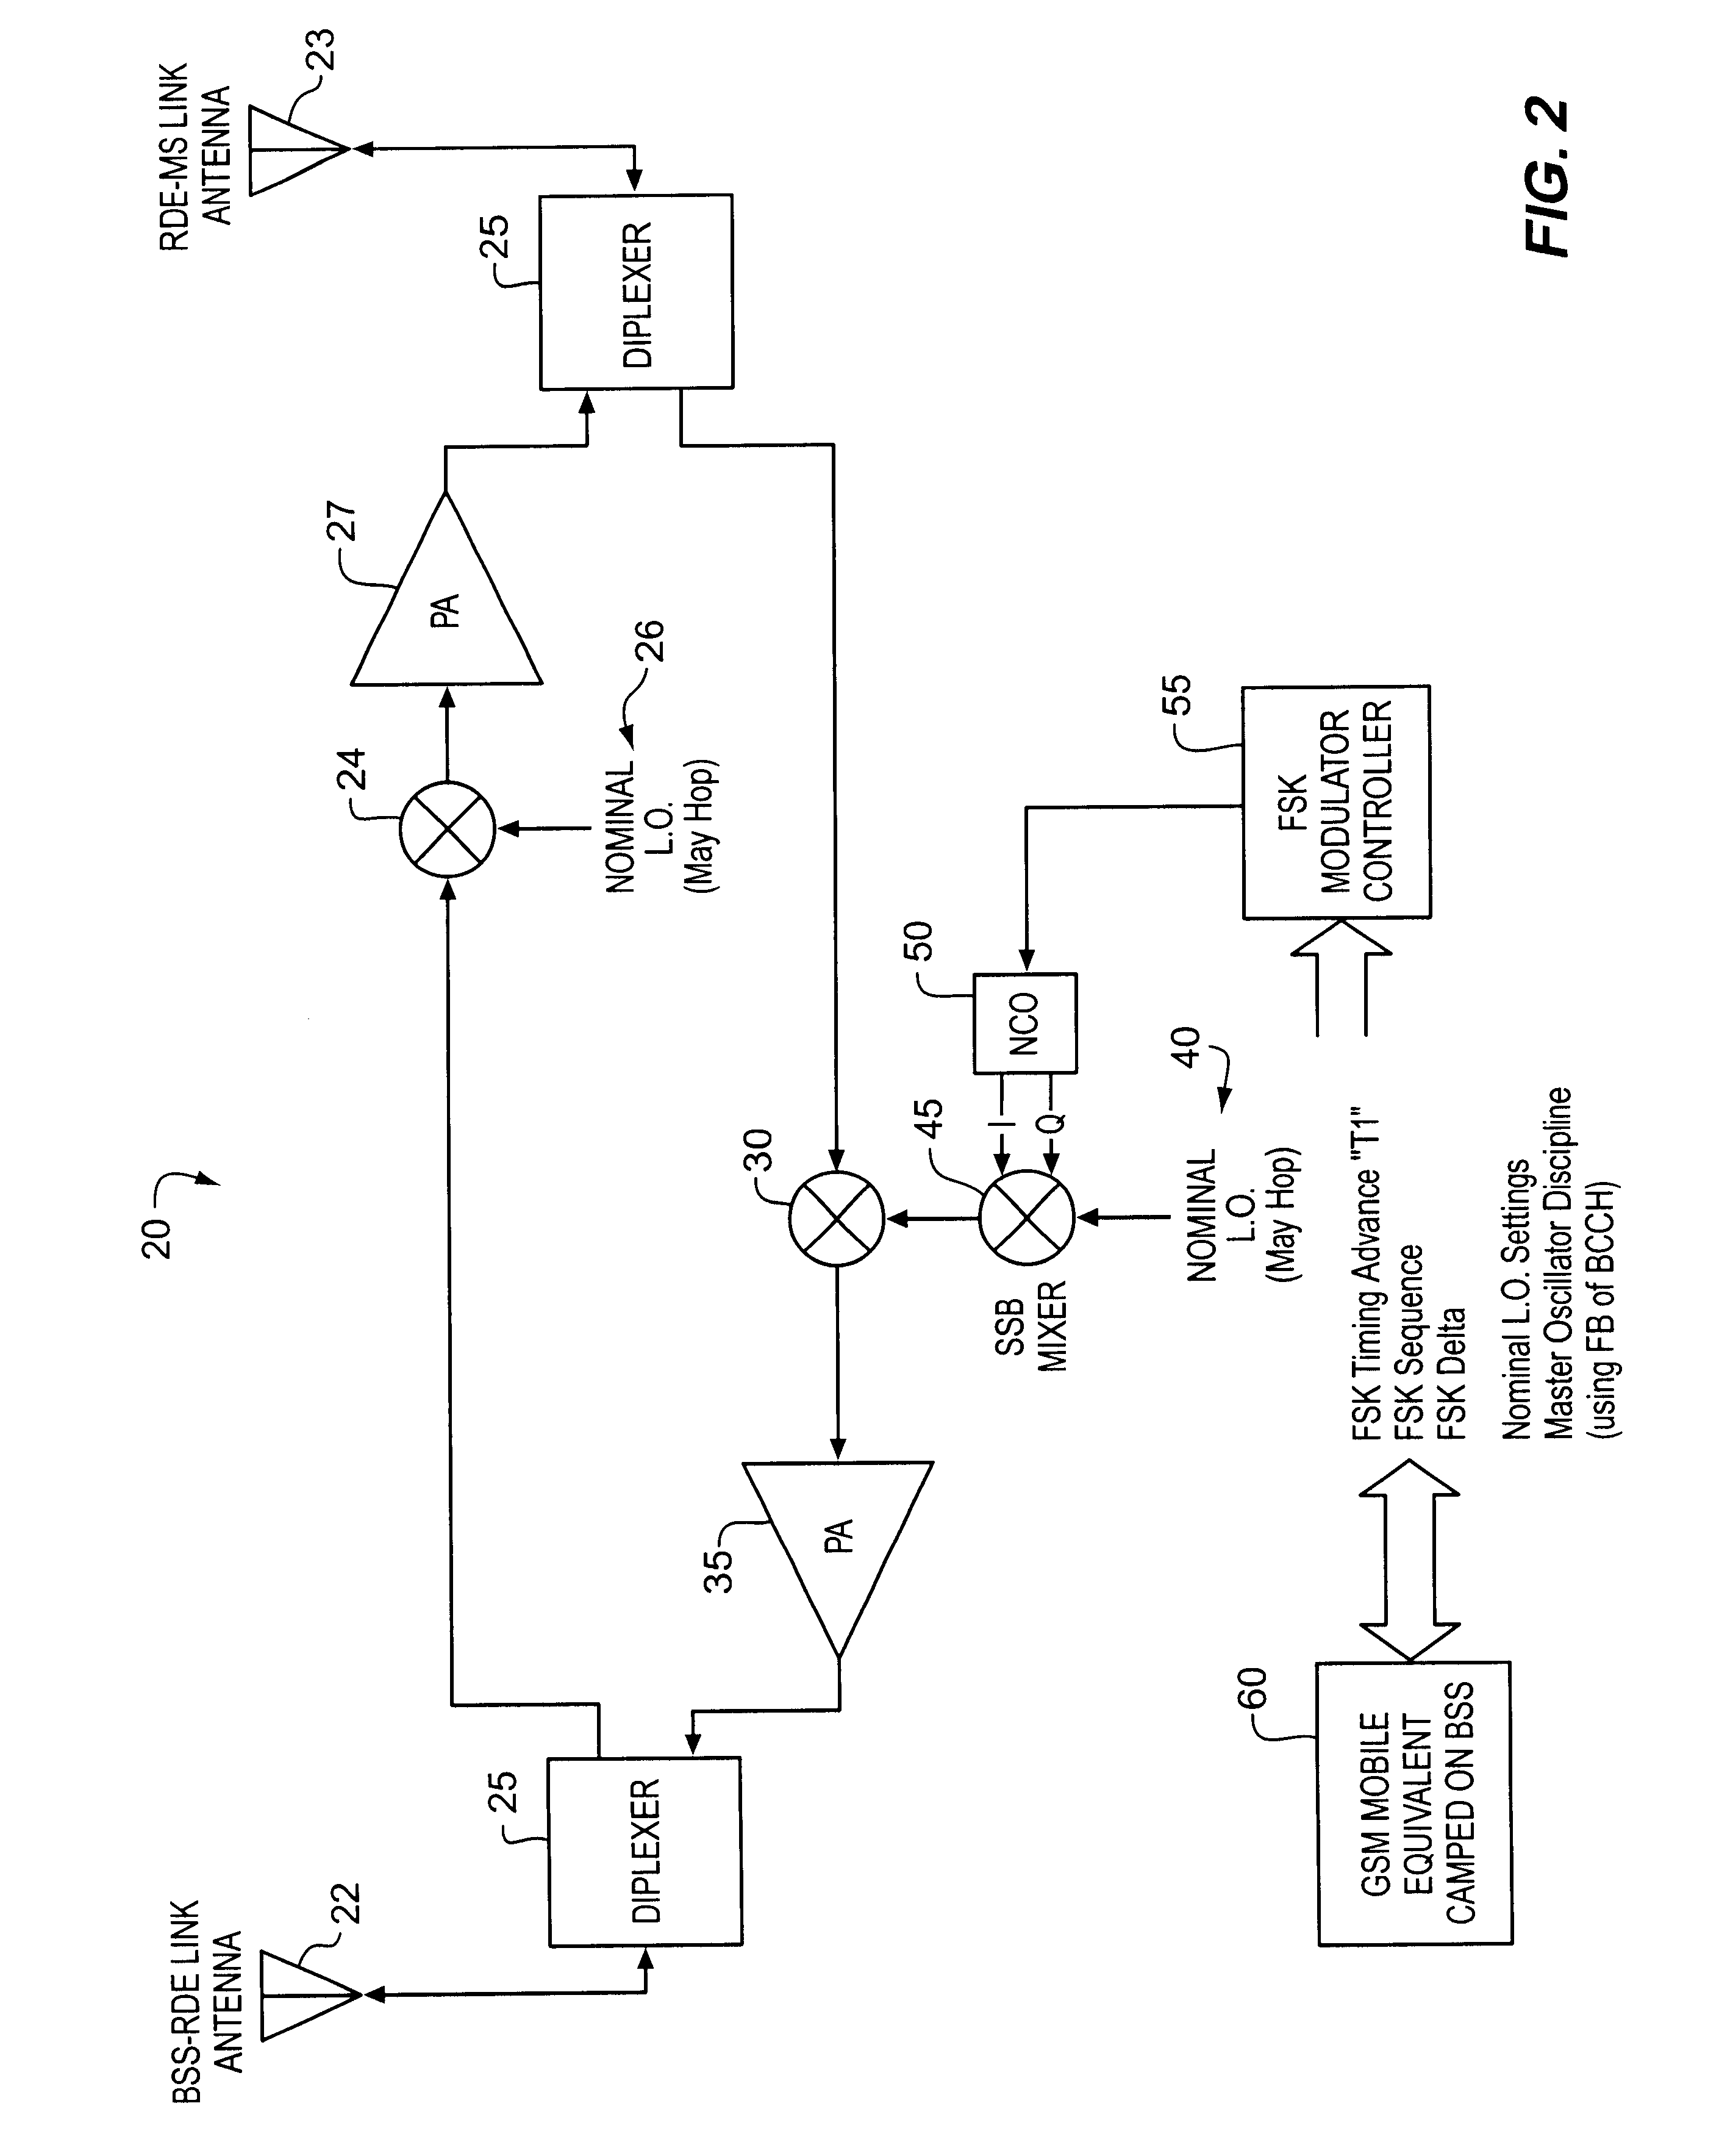 RF signal repeater in mobile communications systems